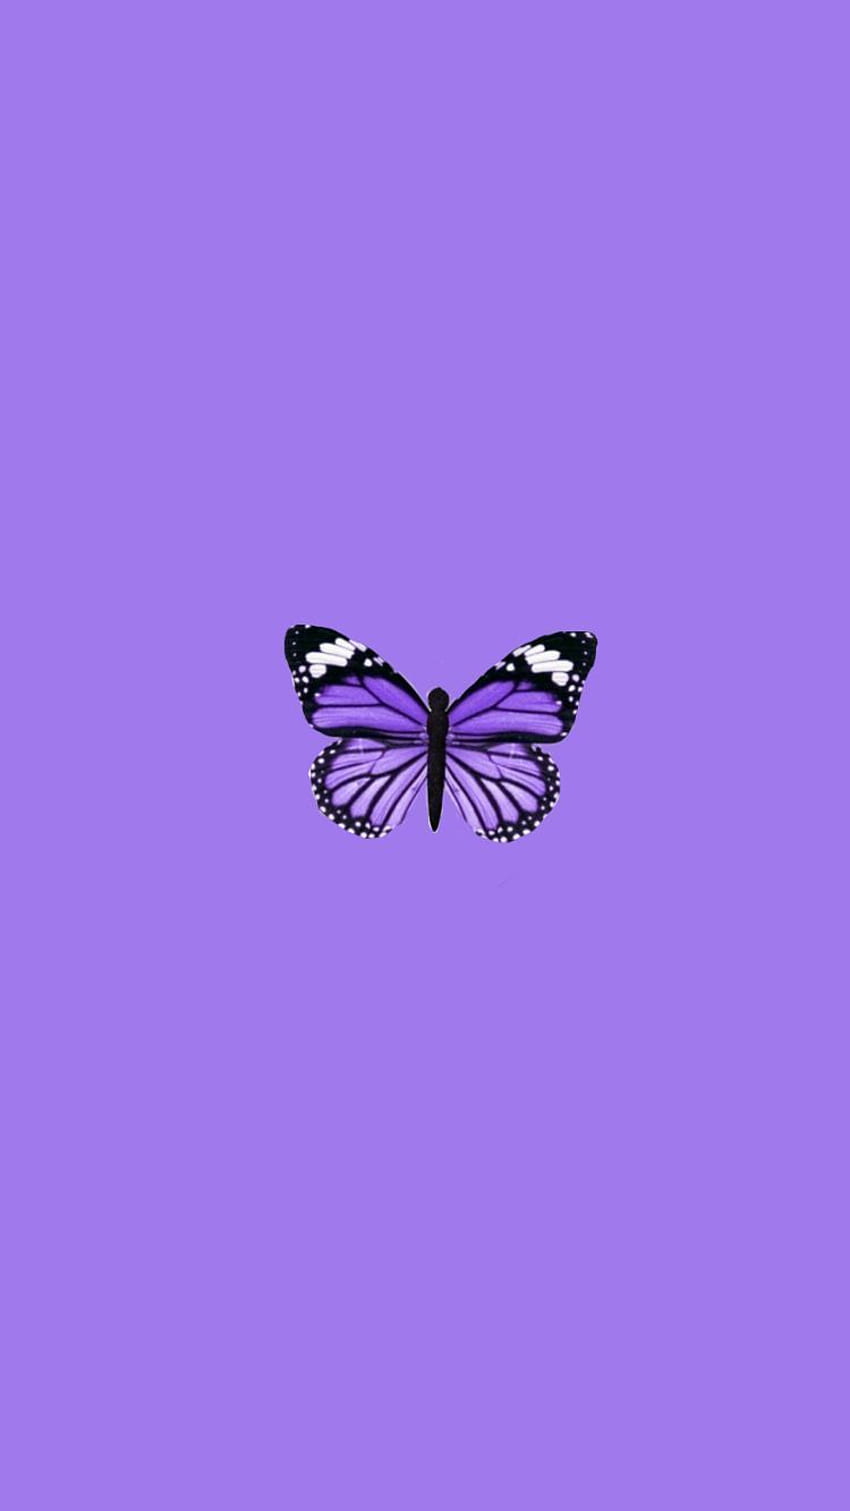 Wallpaper Purple and White Butterfly Illustration Background  Download  Free Image